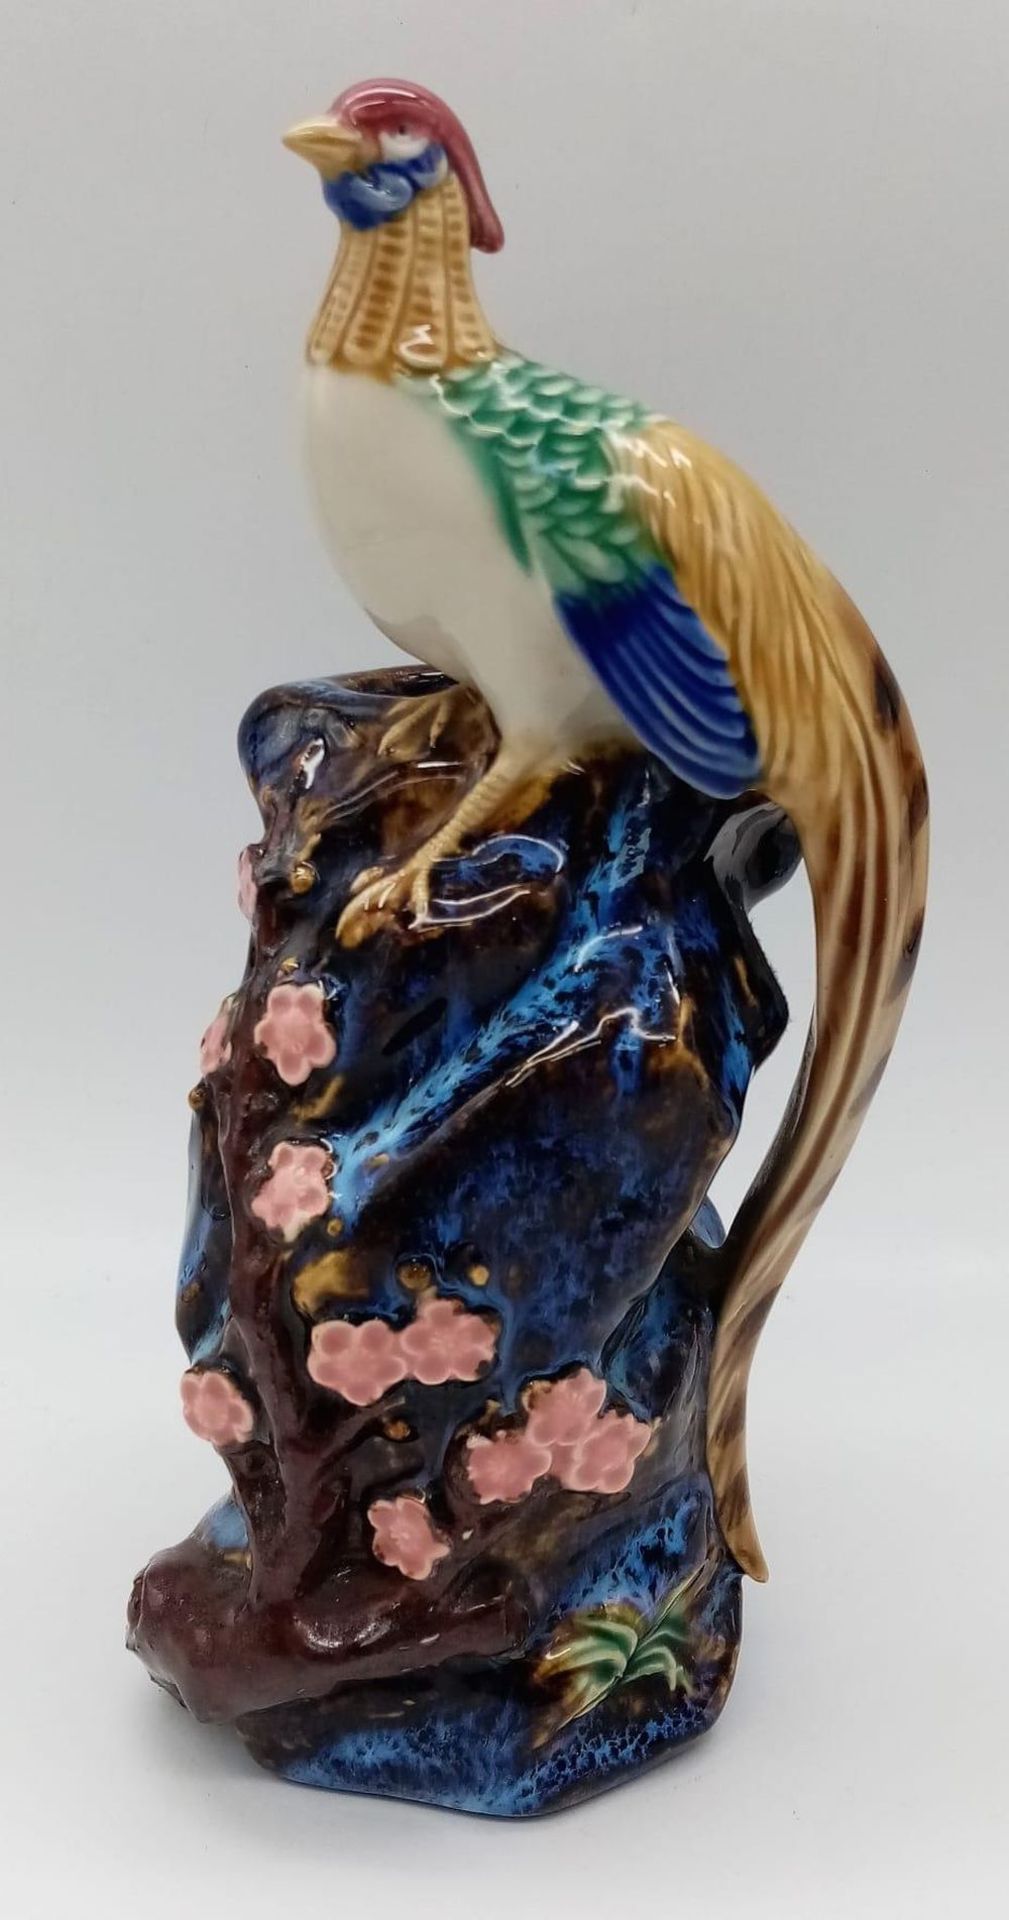 A stunning antique Chinese Terracotta Figure with a perched bird. Wonderful colours throughout. Seal